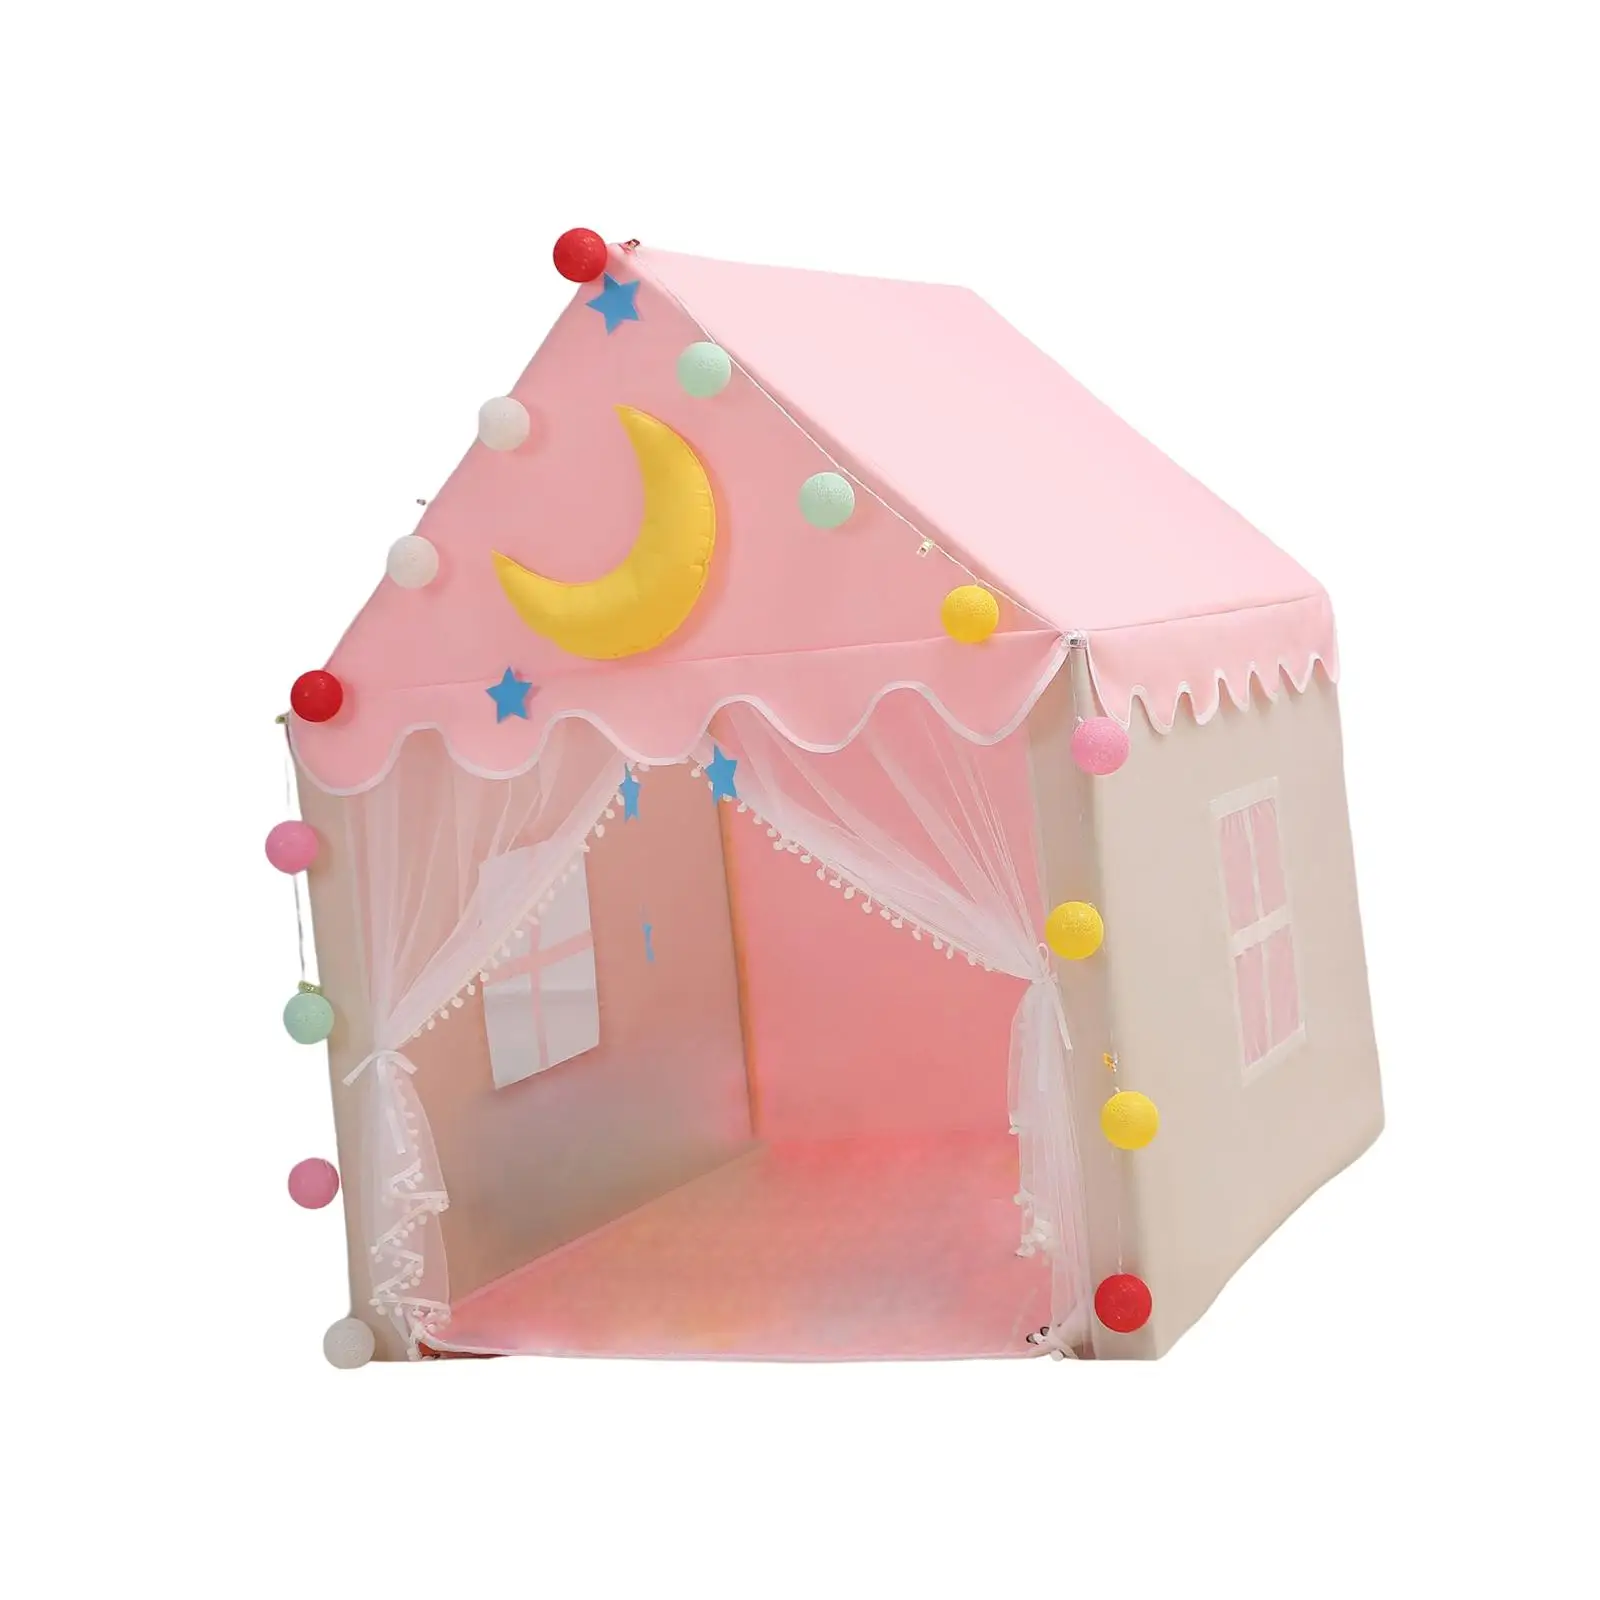 Playhouse Tent Toy Camping Play Tent Playroom Indoor Outdoor Playhouse Tent for Girls Kids Toddlers Boys Holiday Gift